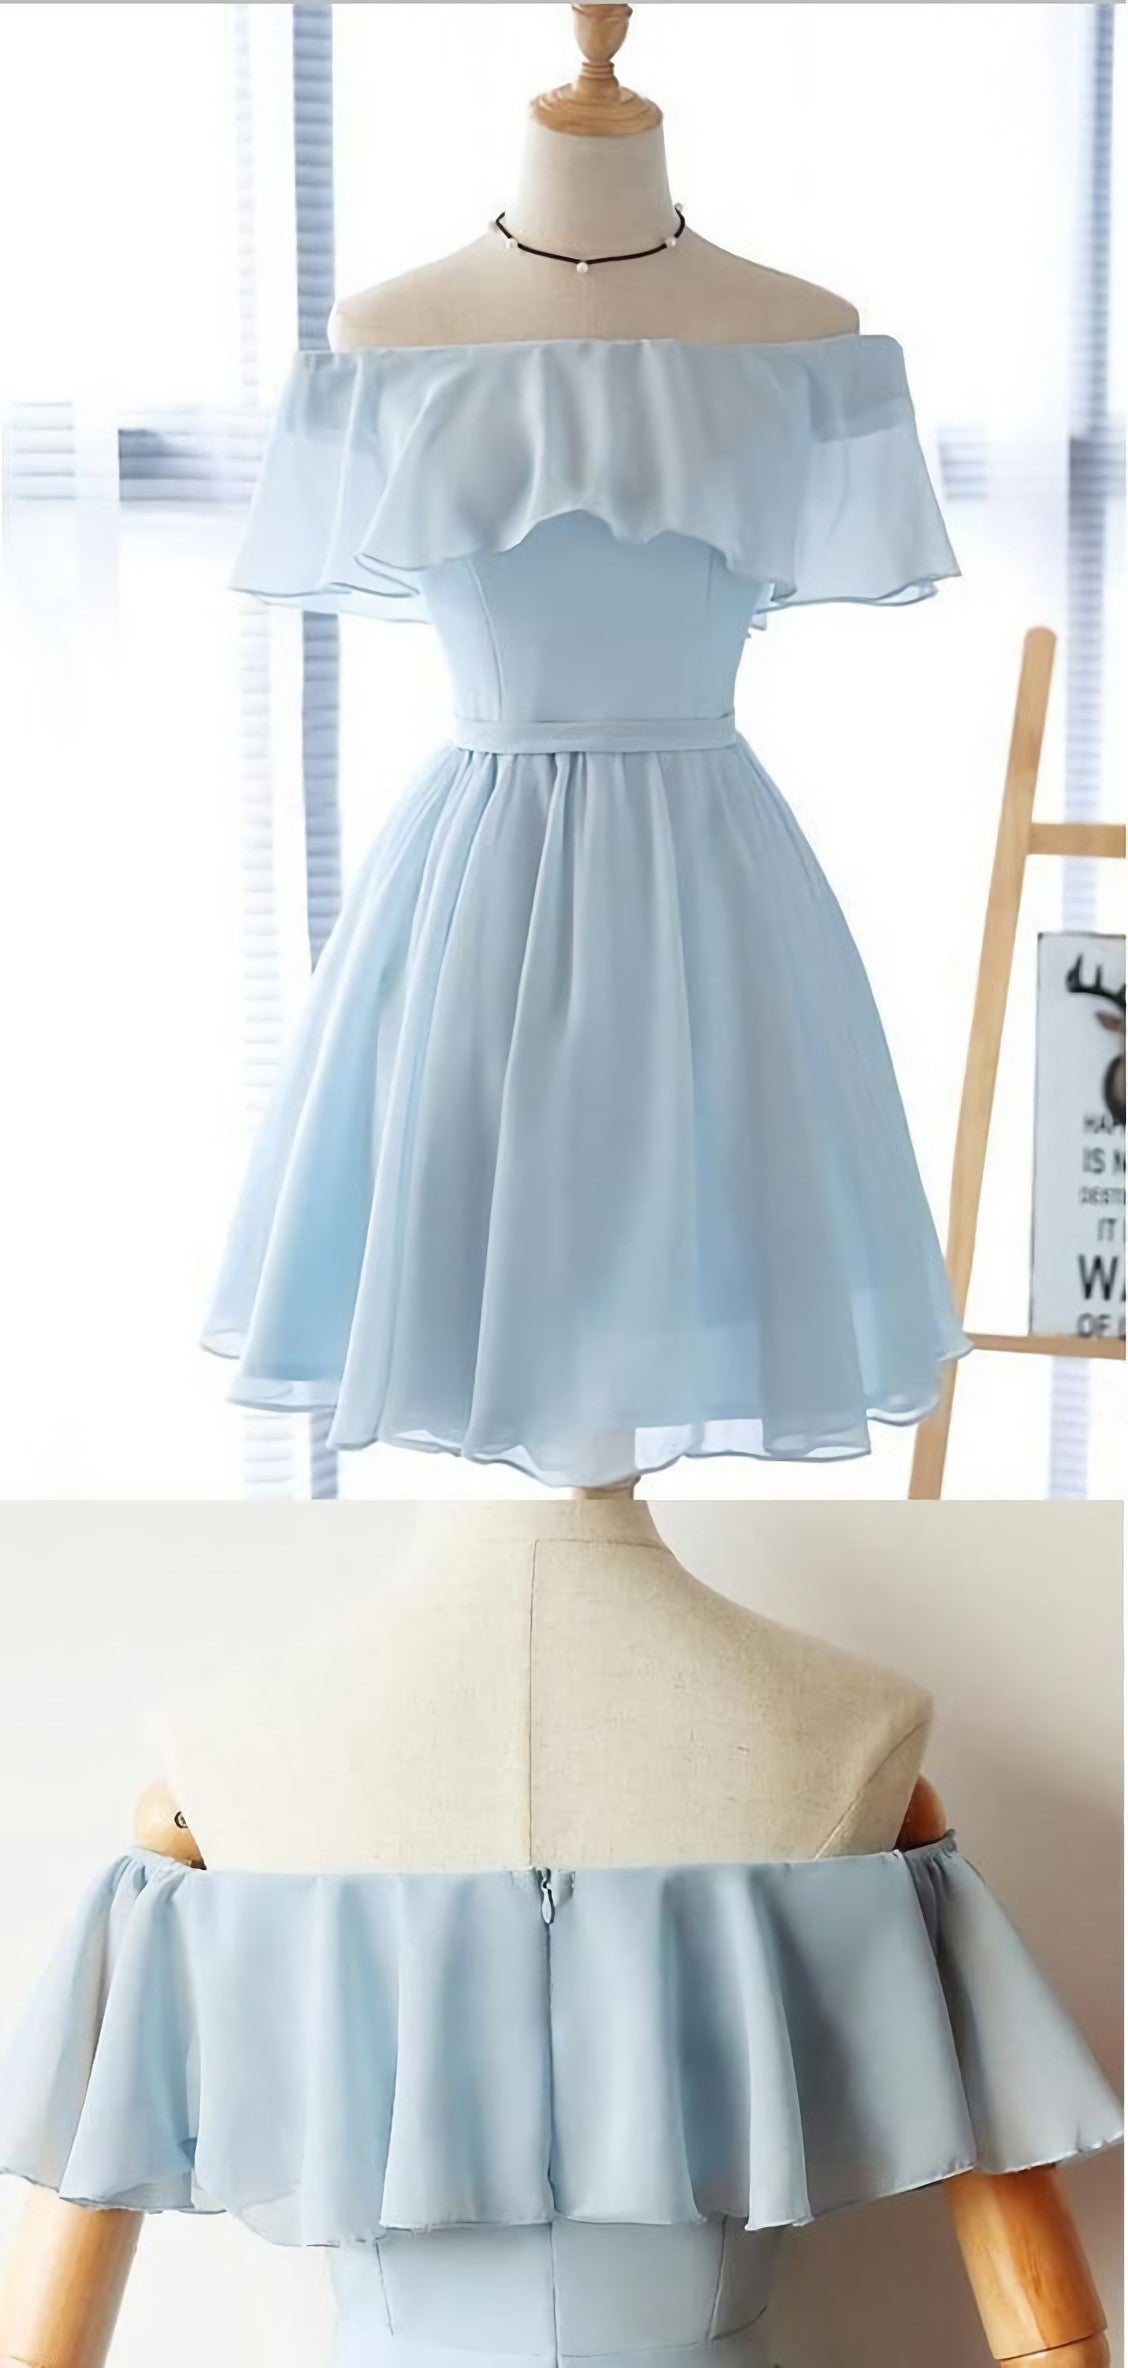 Prom Dress Sweetheart, Simple Off The Shoulder Light Blue Chiffon A Line Short Homecoming Dress